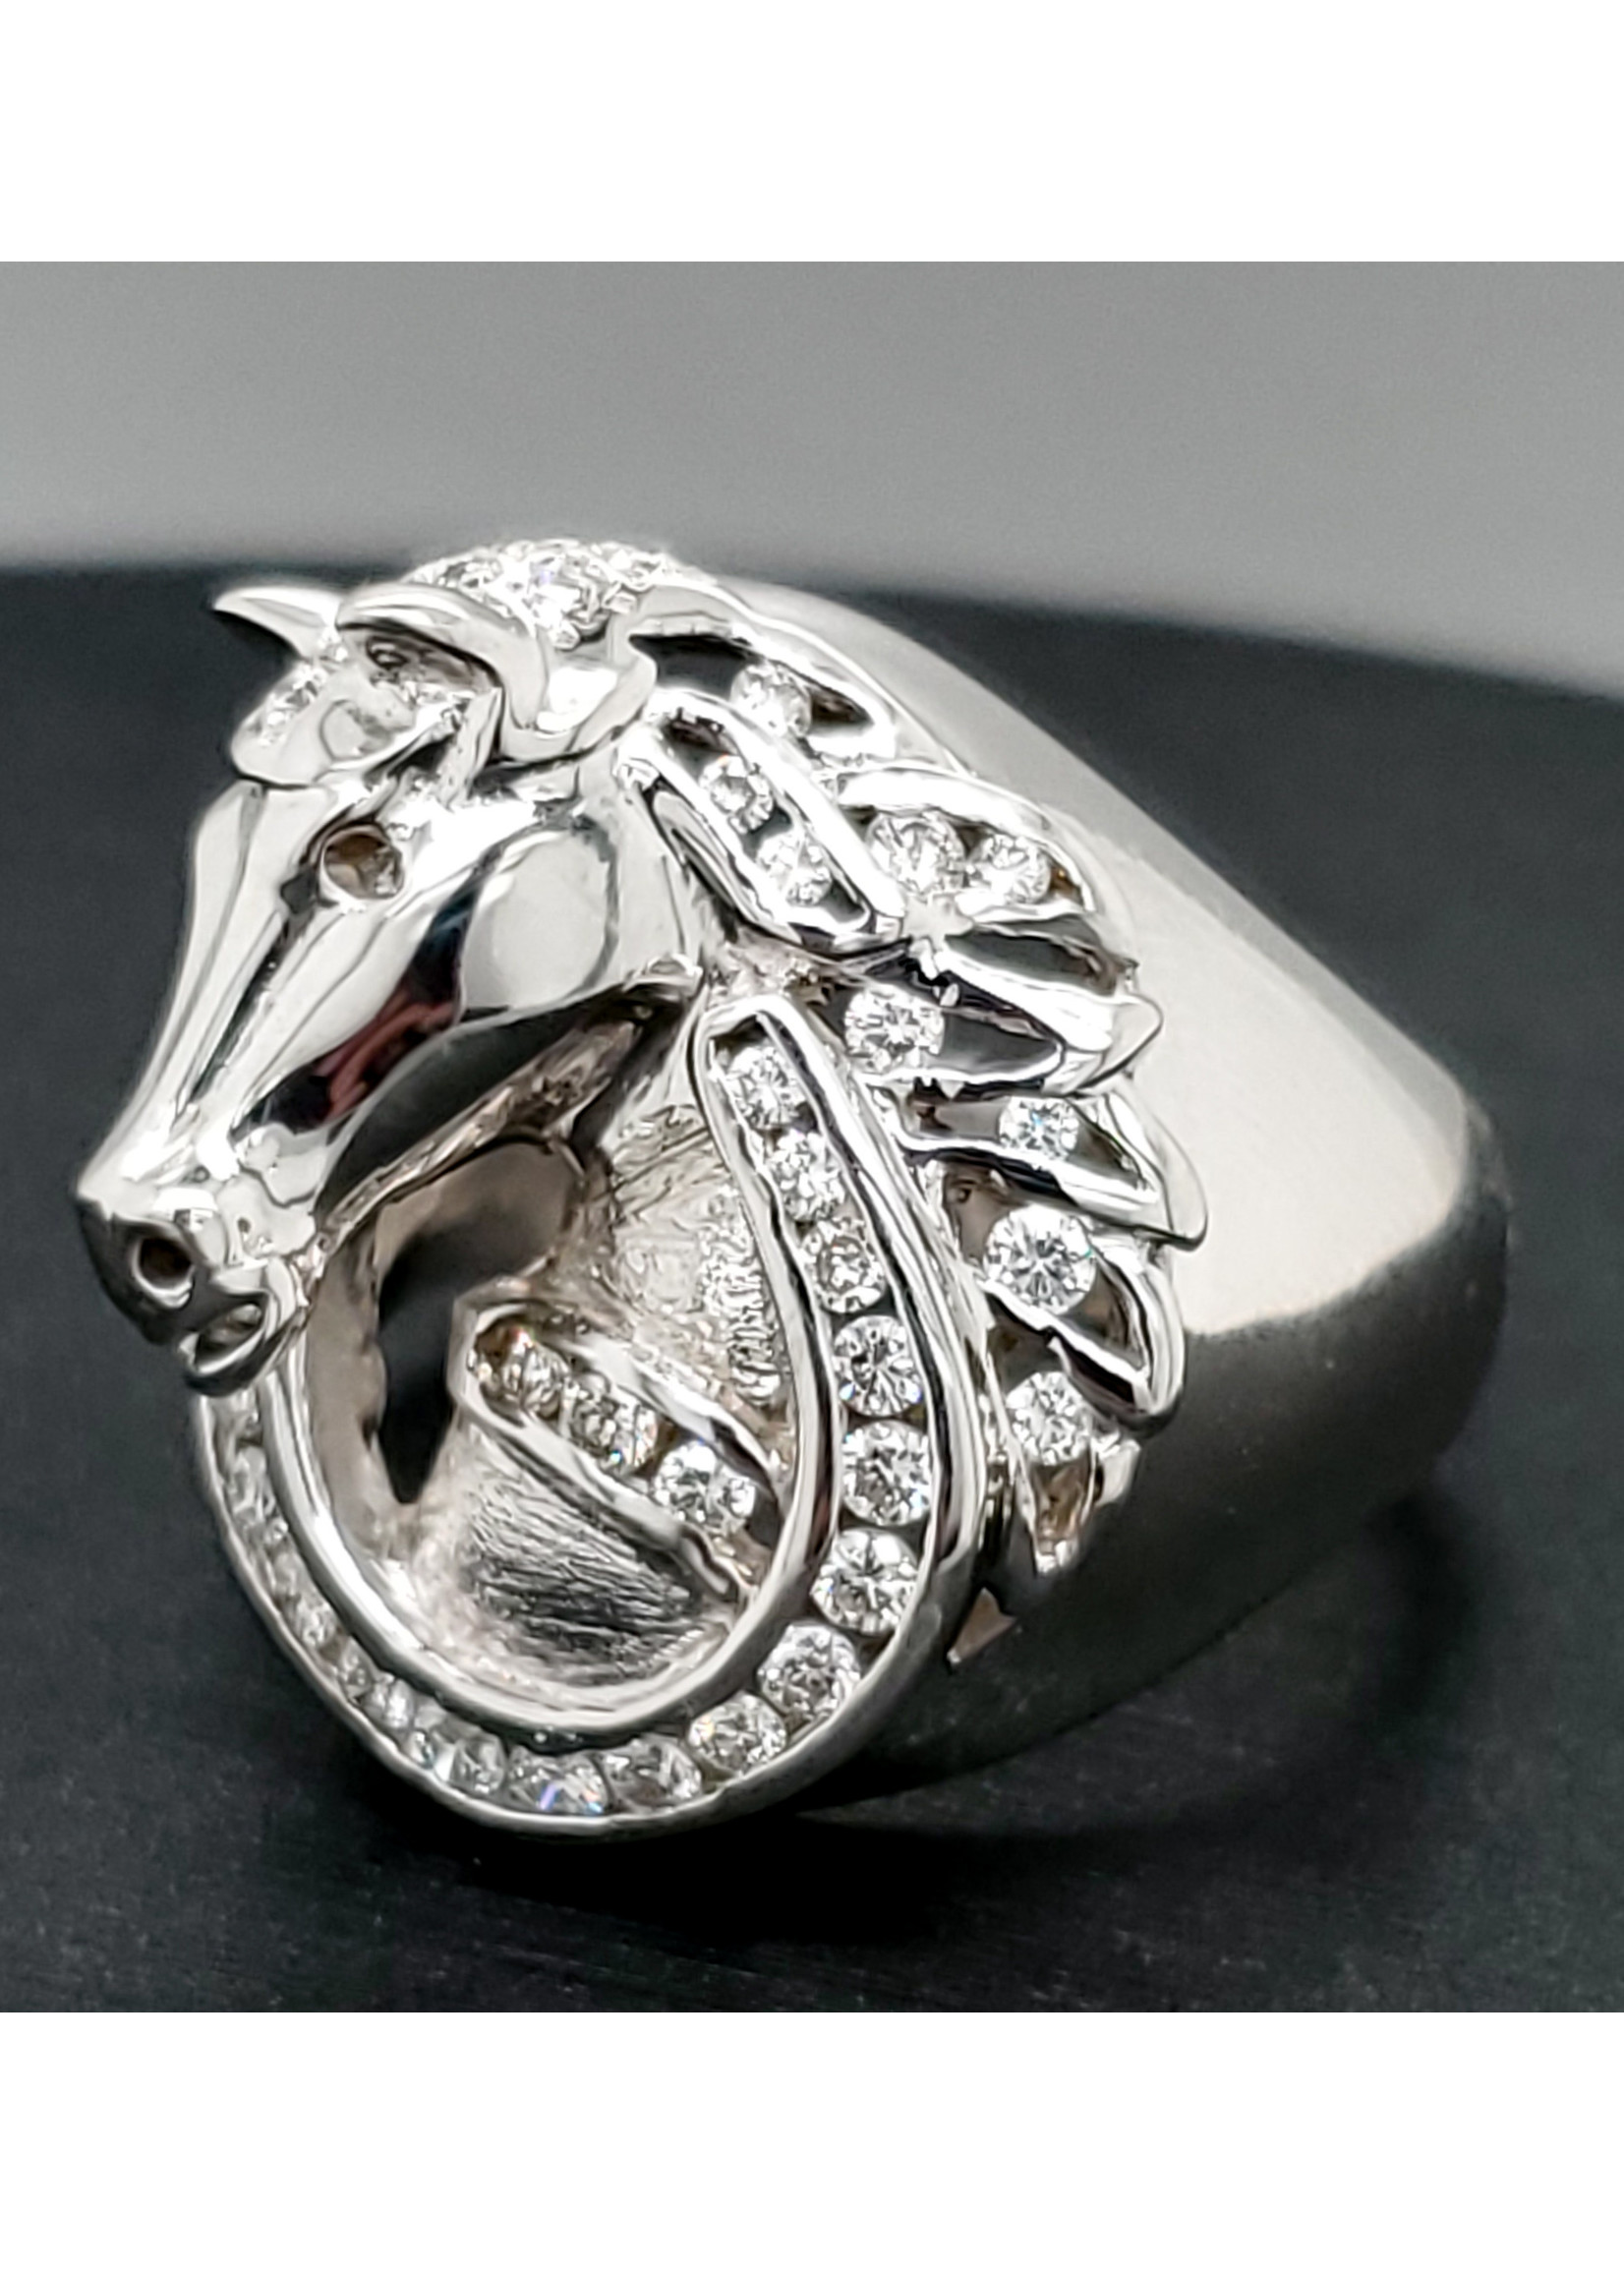 KDesign Studio 18kt White Gold Horse Ring by Goldsmith Hang Lau